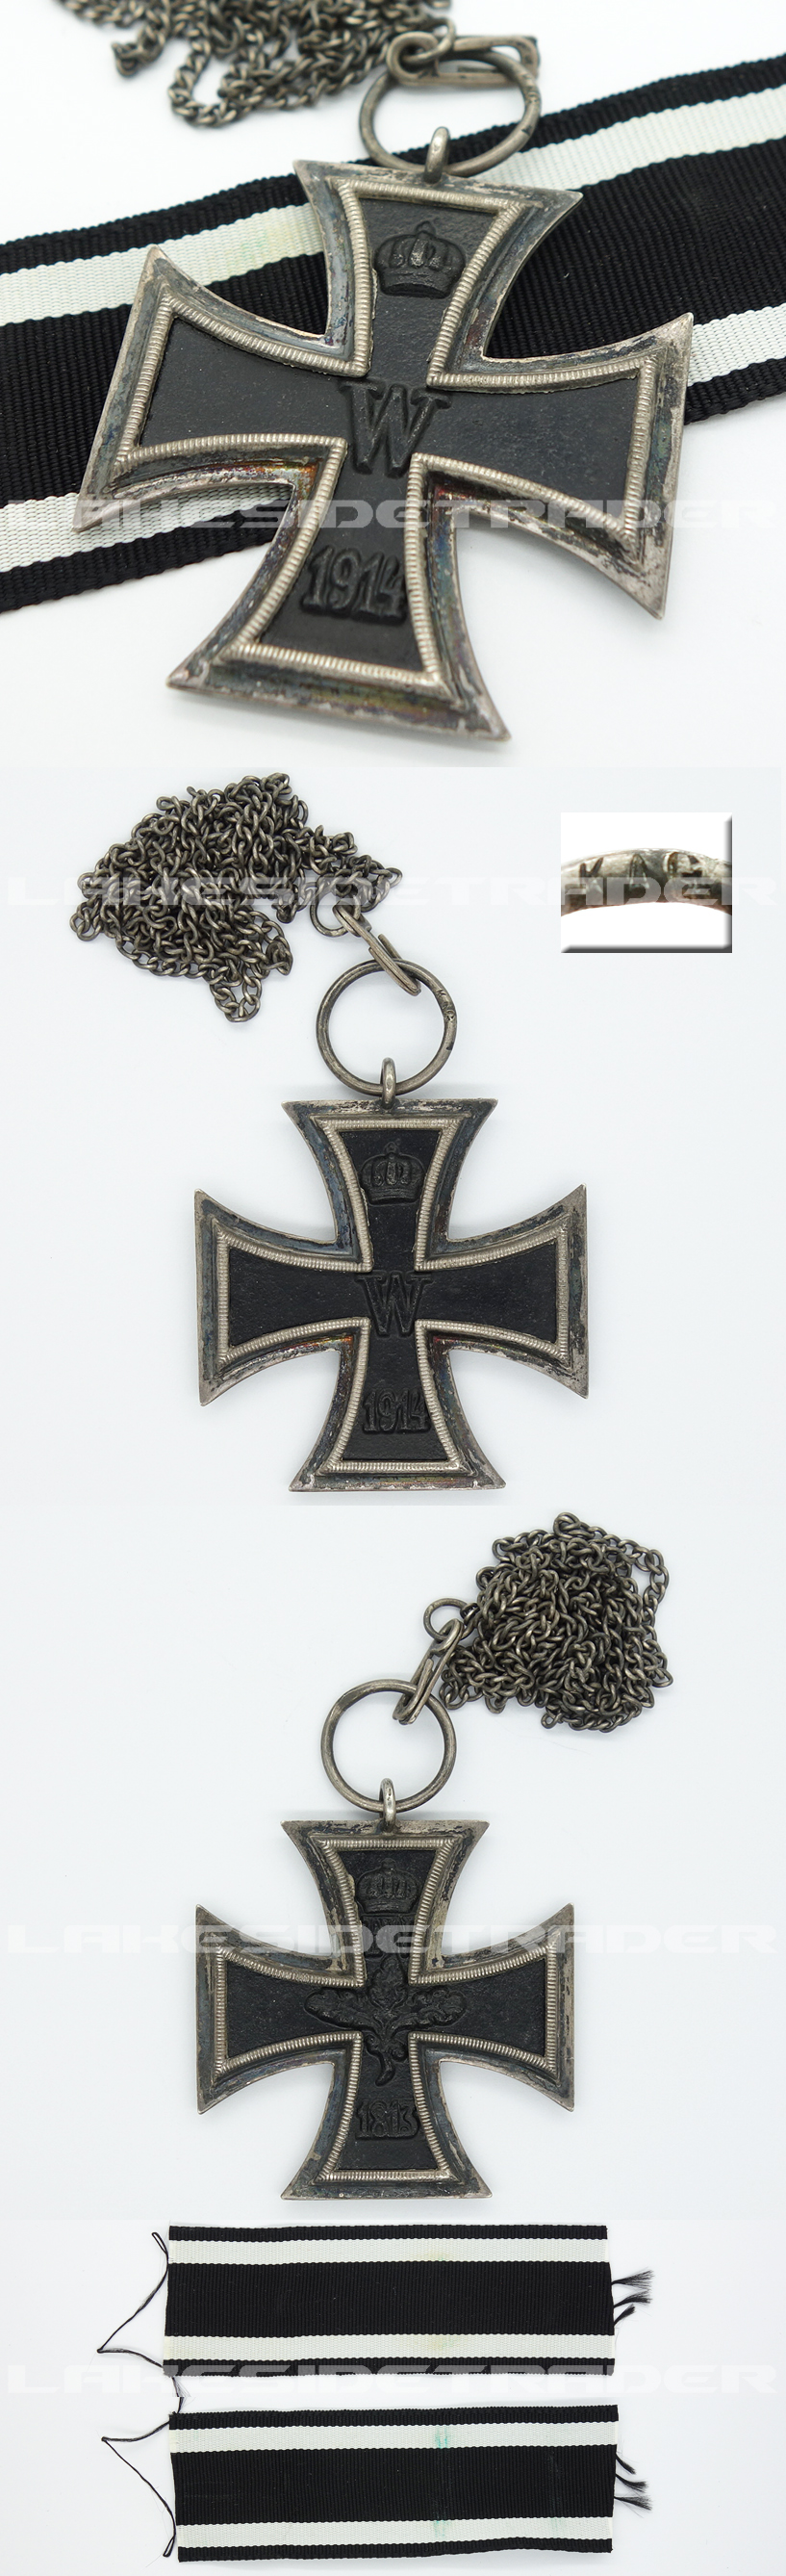 Imperial 2nd Class Iron Cross on a Necklace Chain by KAG